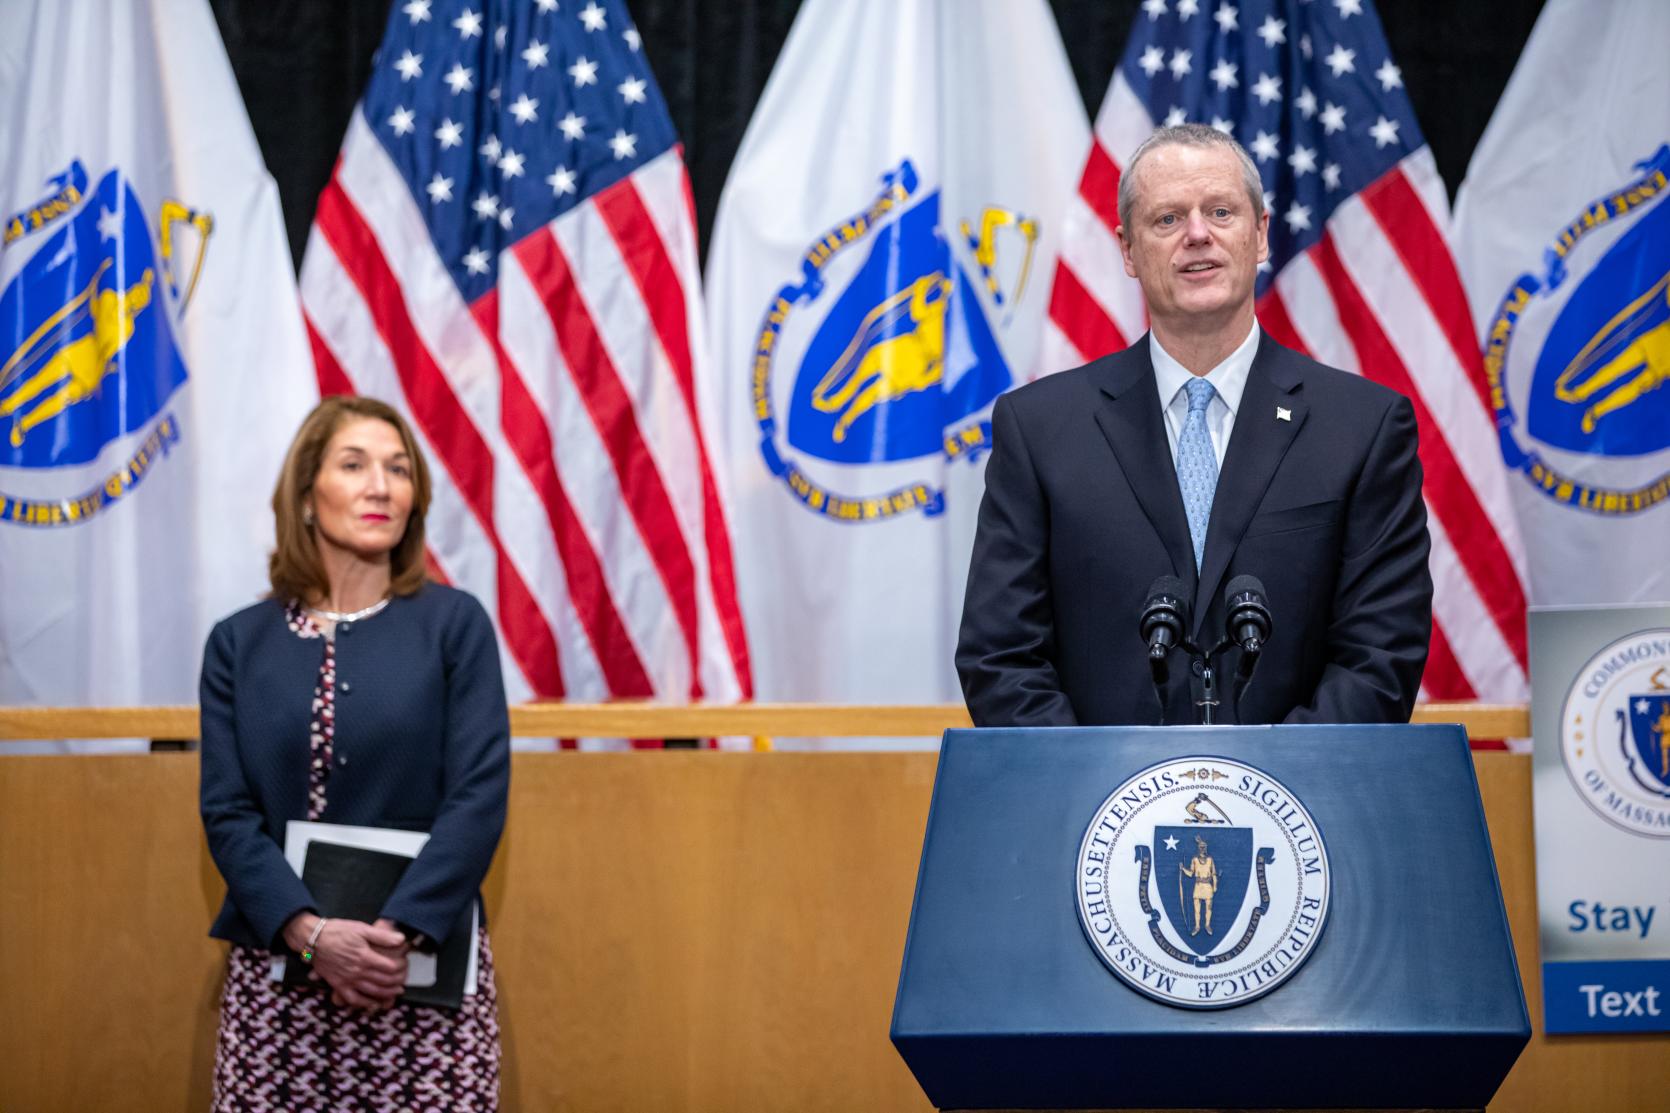 Baker-Polito Administration Announces Testing Site Expansion, New Restrictions For Grocery Stores, Crisis Standards of Care Recommendations